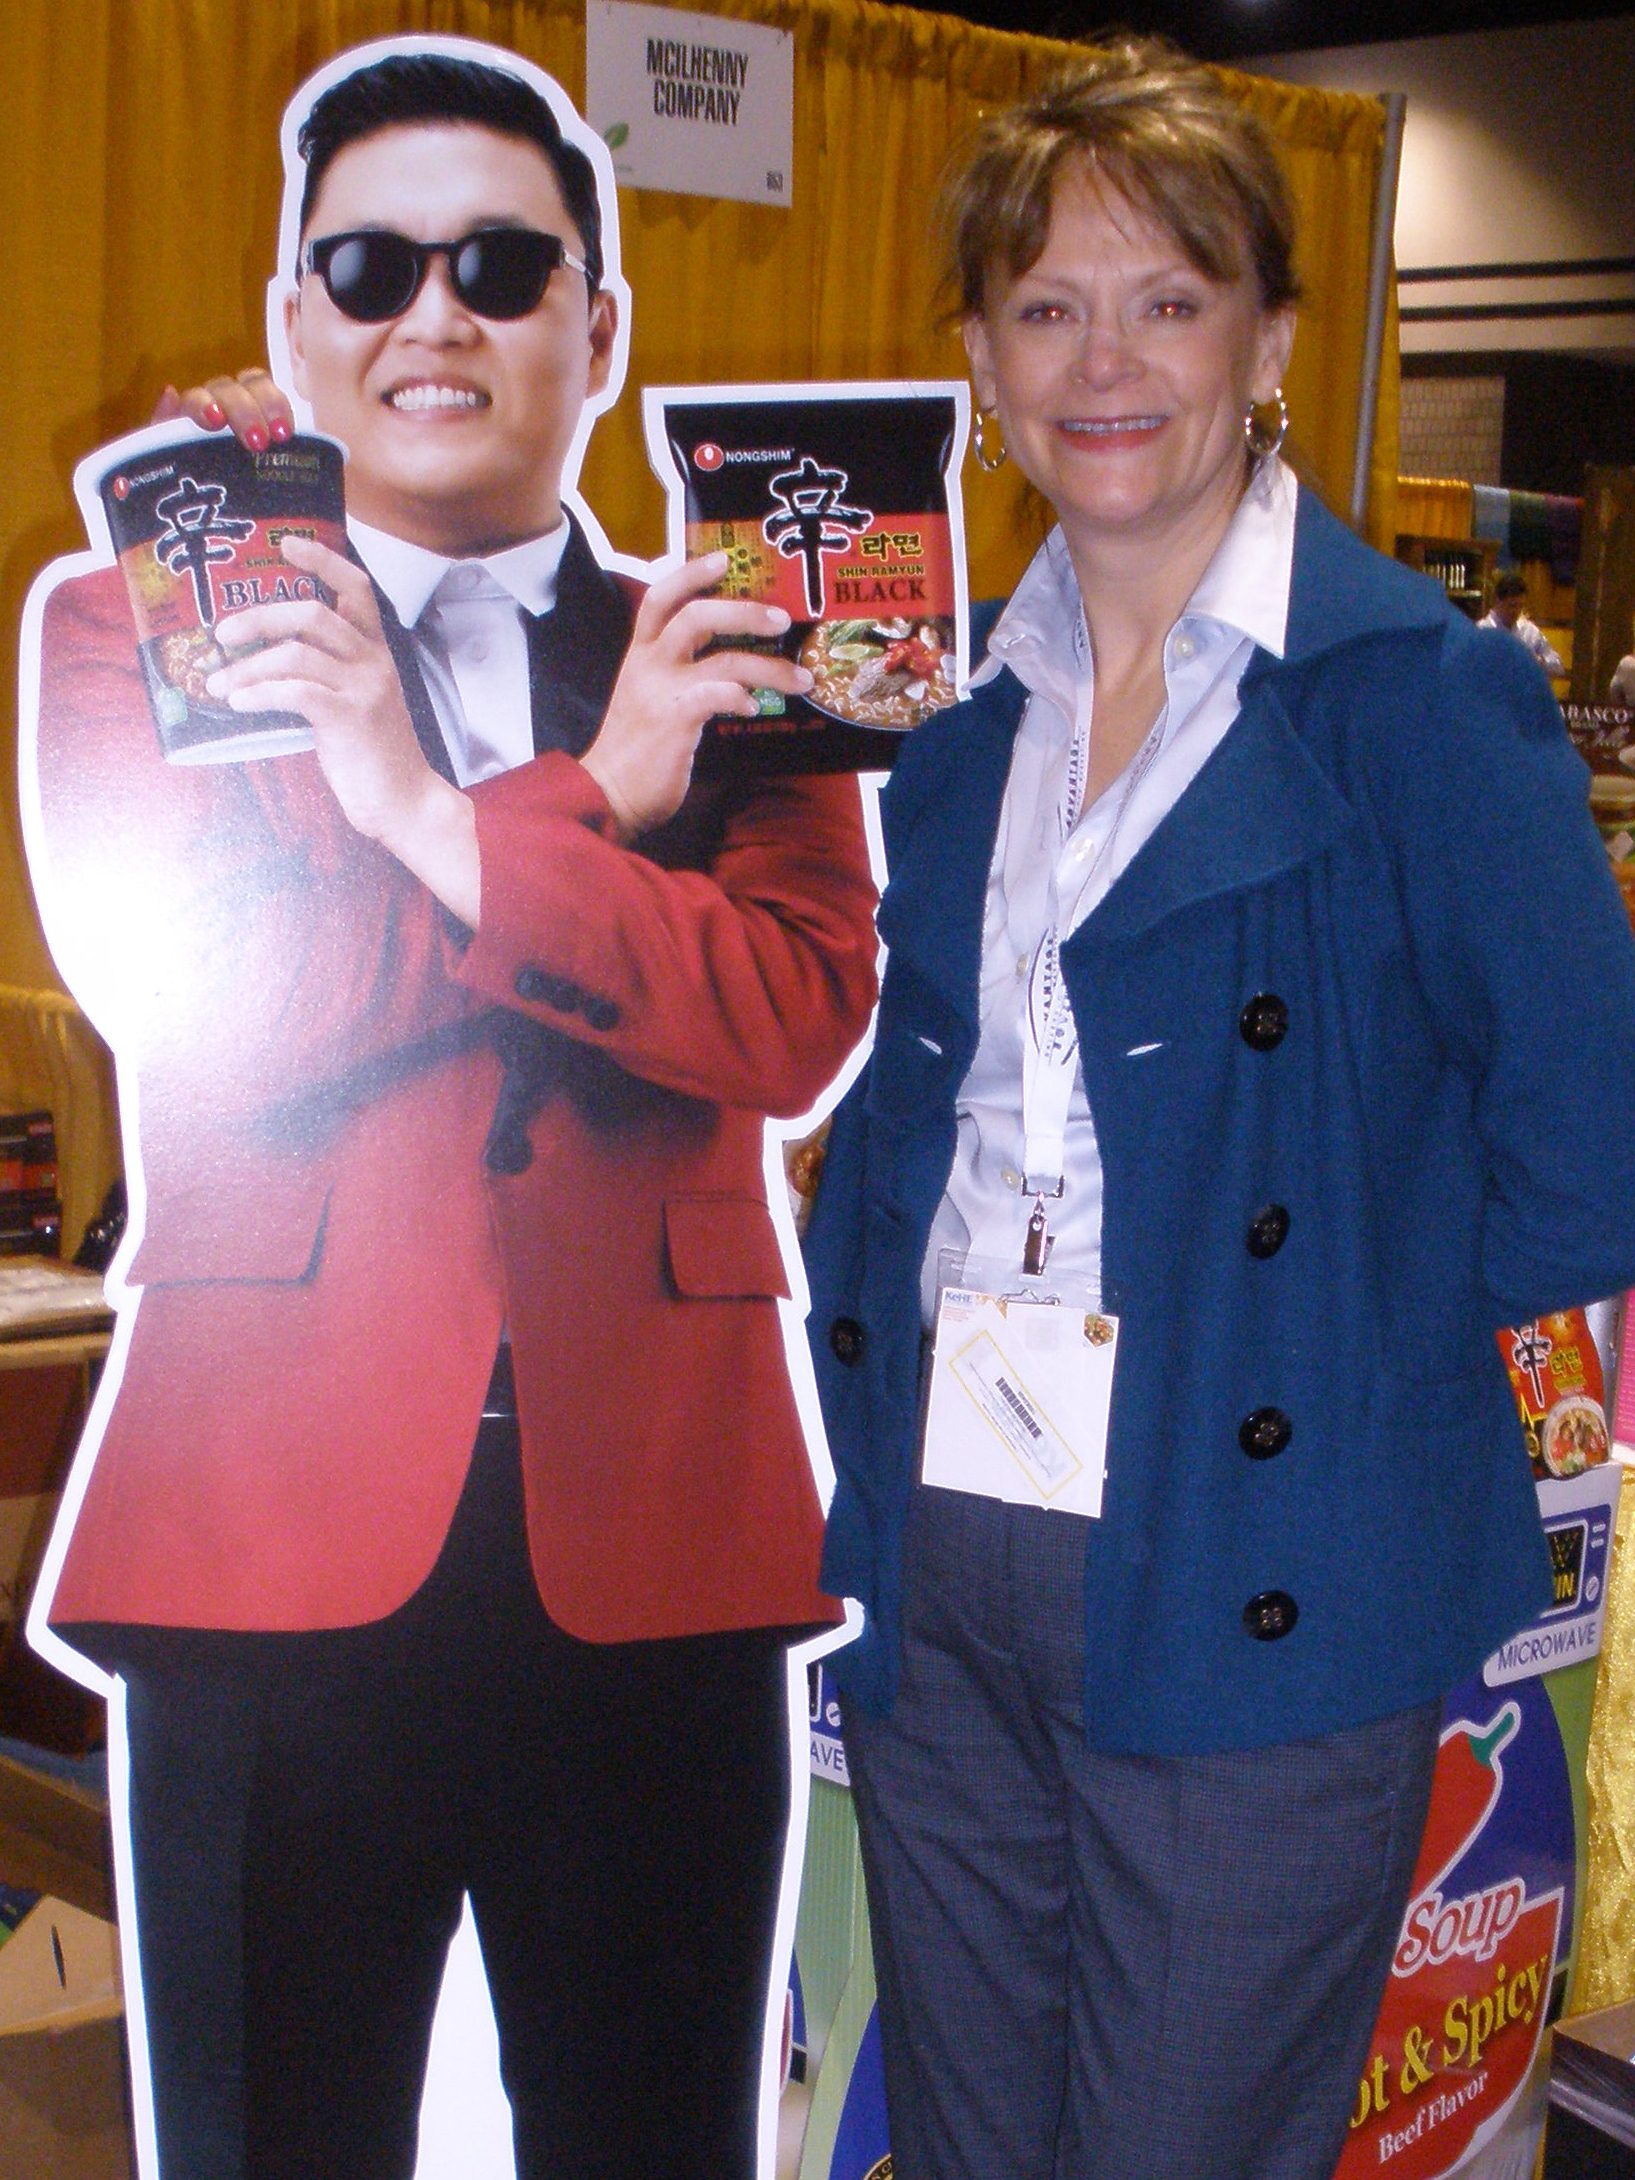 Beckee standing next to a cardboard cutout of Psy